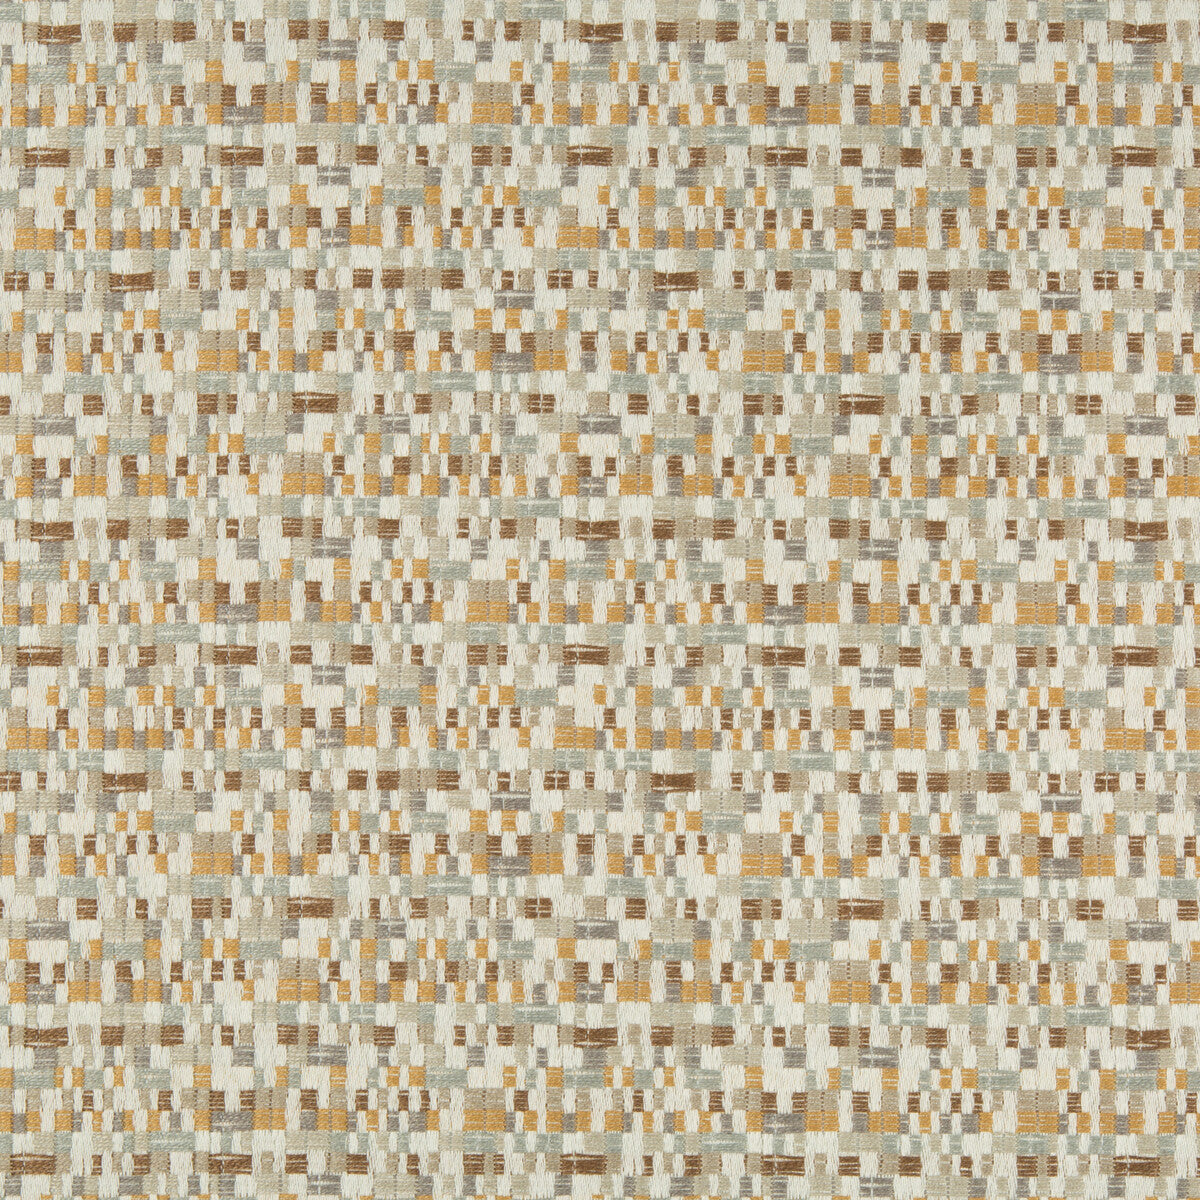 Kravet Contract fabric in 34736-611 color - pattern 34736.611.0 - by Kravet Contract in the Crypton Incase collection